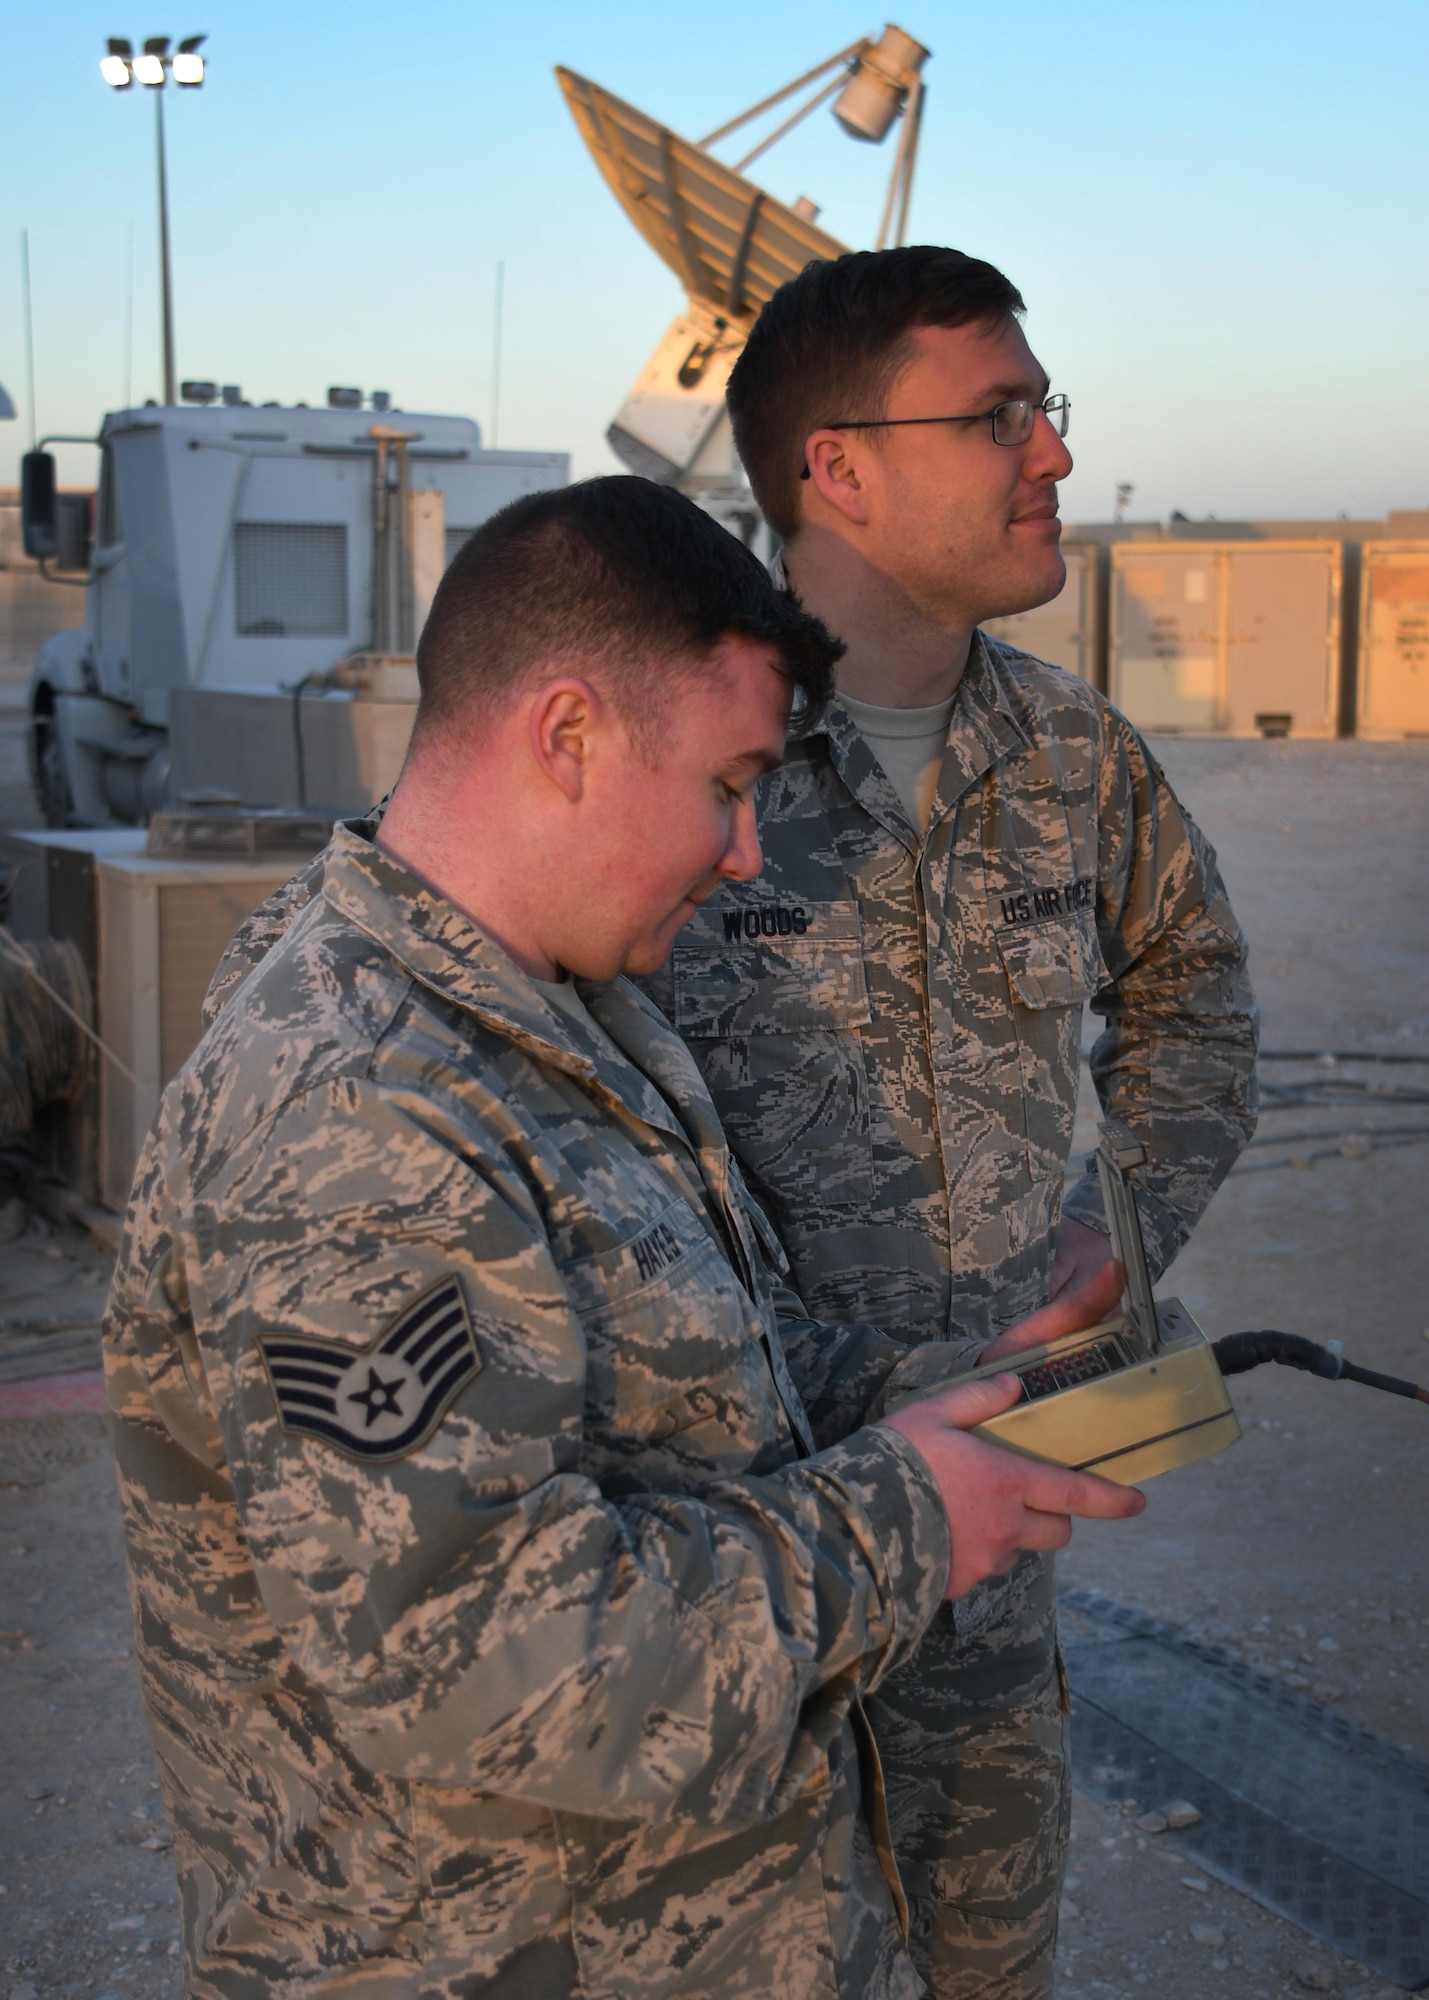 U.S. Air Force Staff Sgt. Chris Hayes, a Bounty Hunter crew chief, and U.S. Air Force Staff Sgt. Lucas Woods, a defensive space control maintainer, both with the 379th Expeditionary Operations Support Squadron, use a control pad to redirect an antenna at Al Udeid Air Base, Qatar, Jan. 30, 2017. These antennas are an Operation Silent Sentry asset and help find and locate electromagnetic interference in the U.S. Central Command area of responsibility. (U.S. Air Force photo by Senior Airman Miles Wilson)